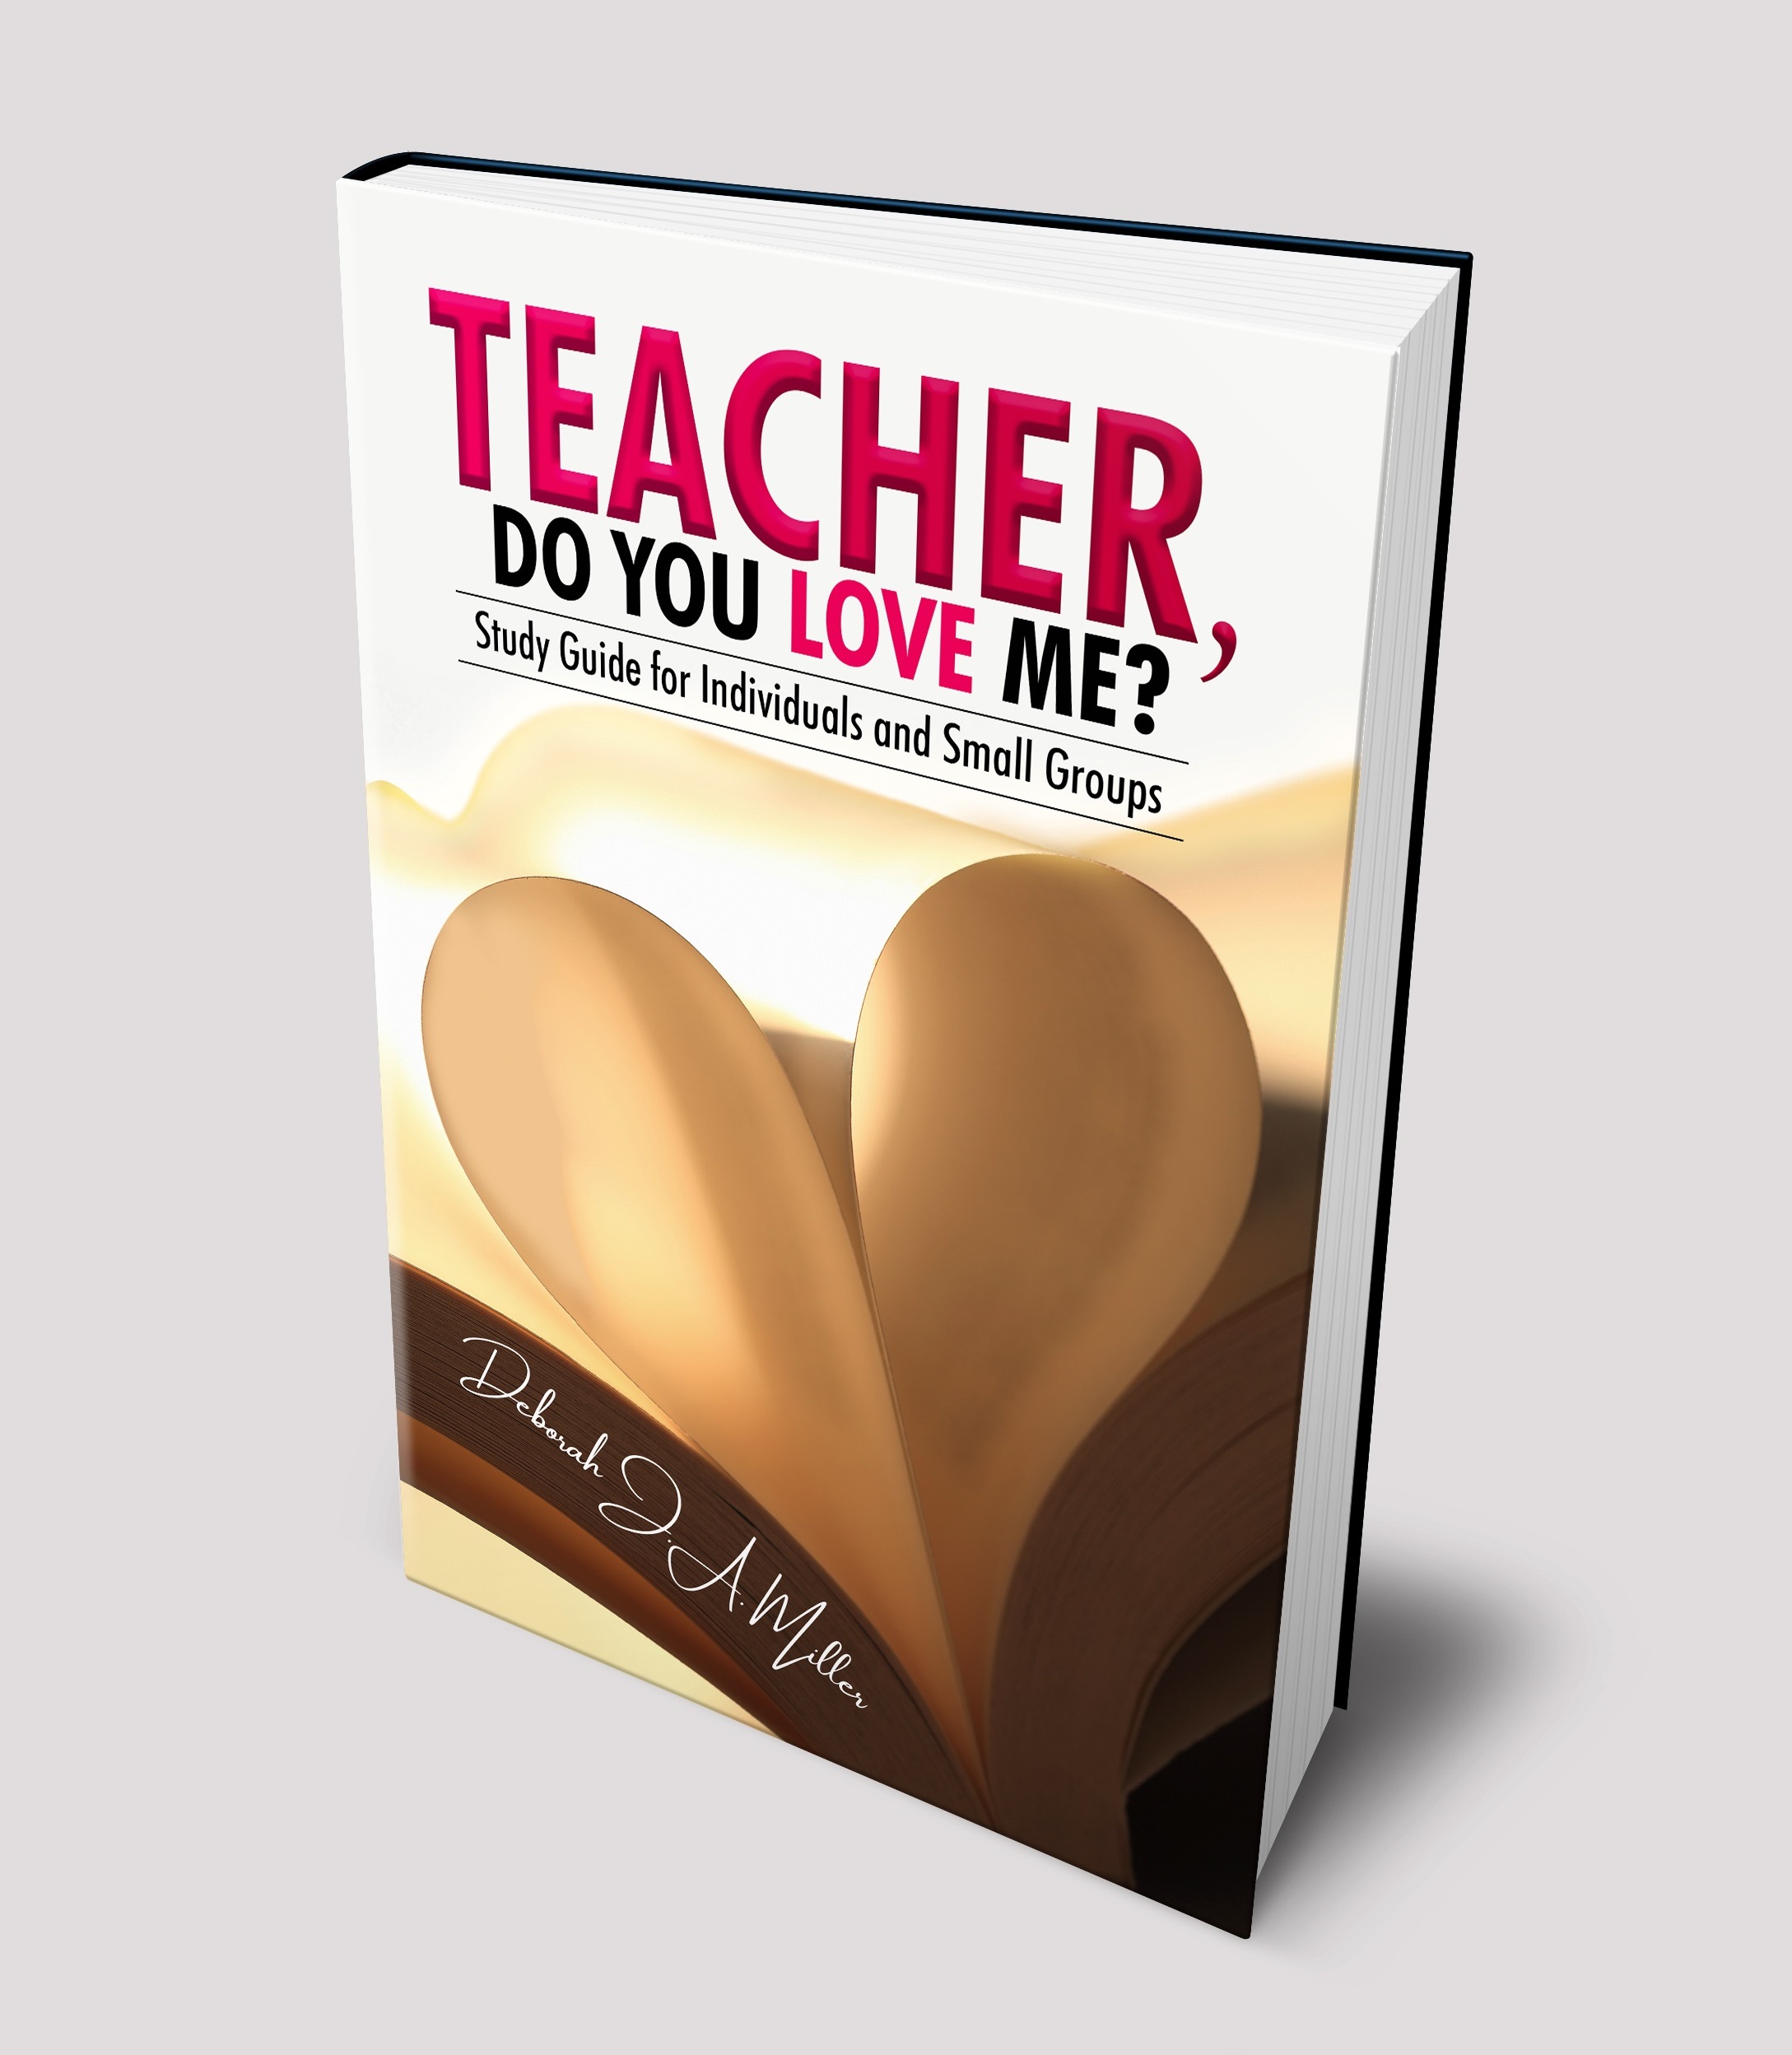 Teacher, Do You Love Me? Study Guide for Individuals and Small Groups by Deborah J. A Miller